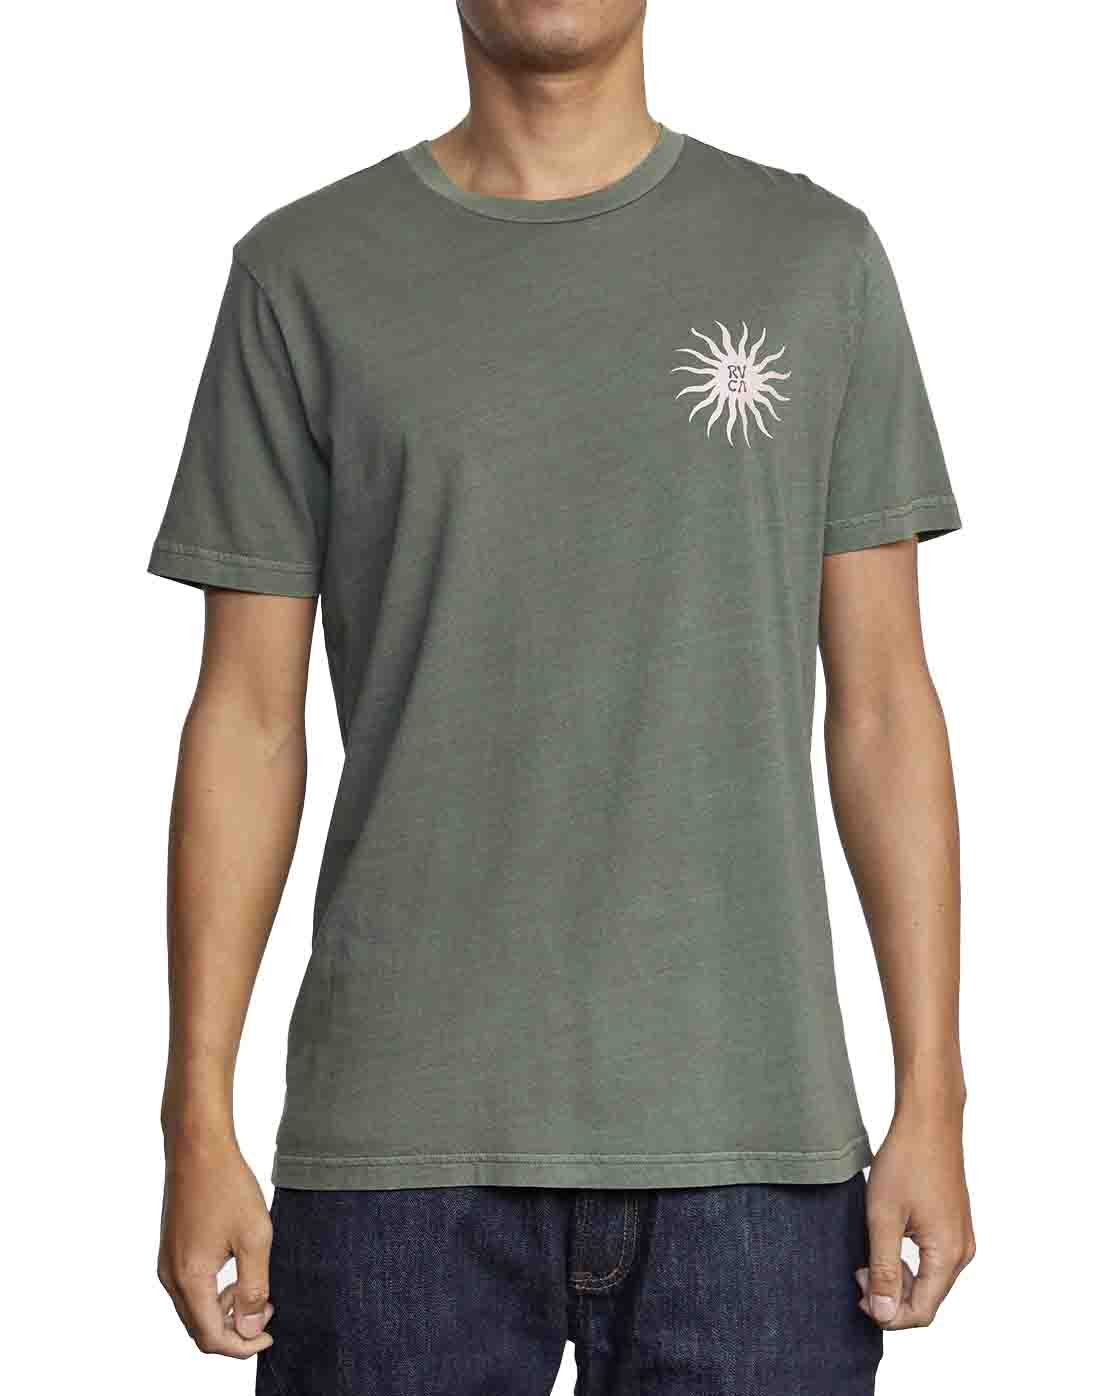 RVCA Sun Sprout SS Tee